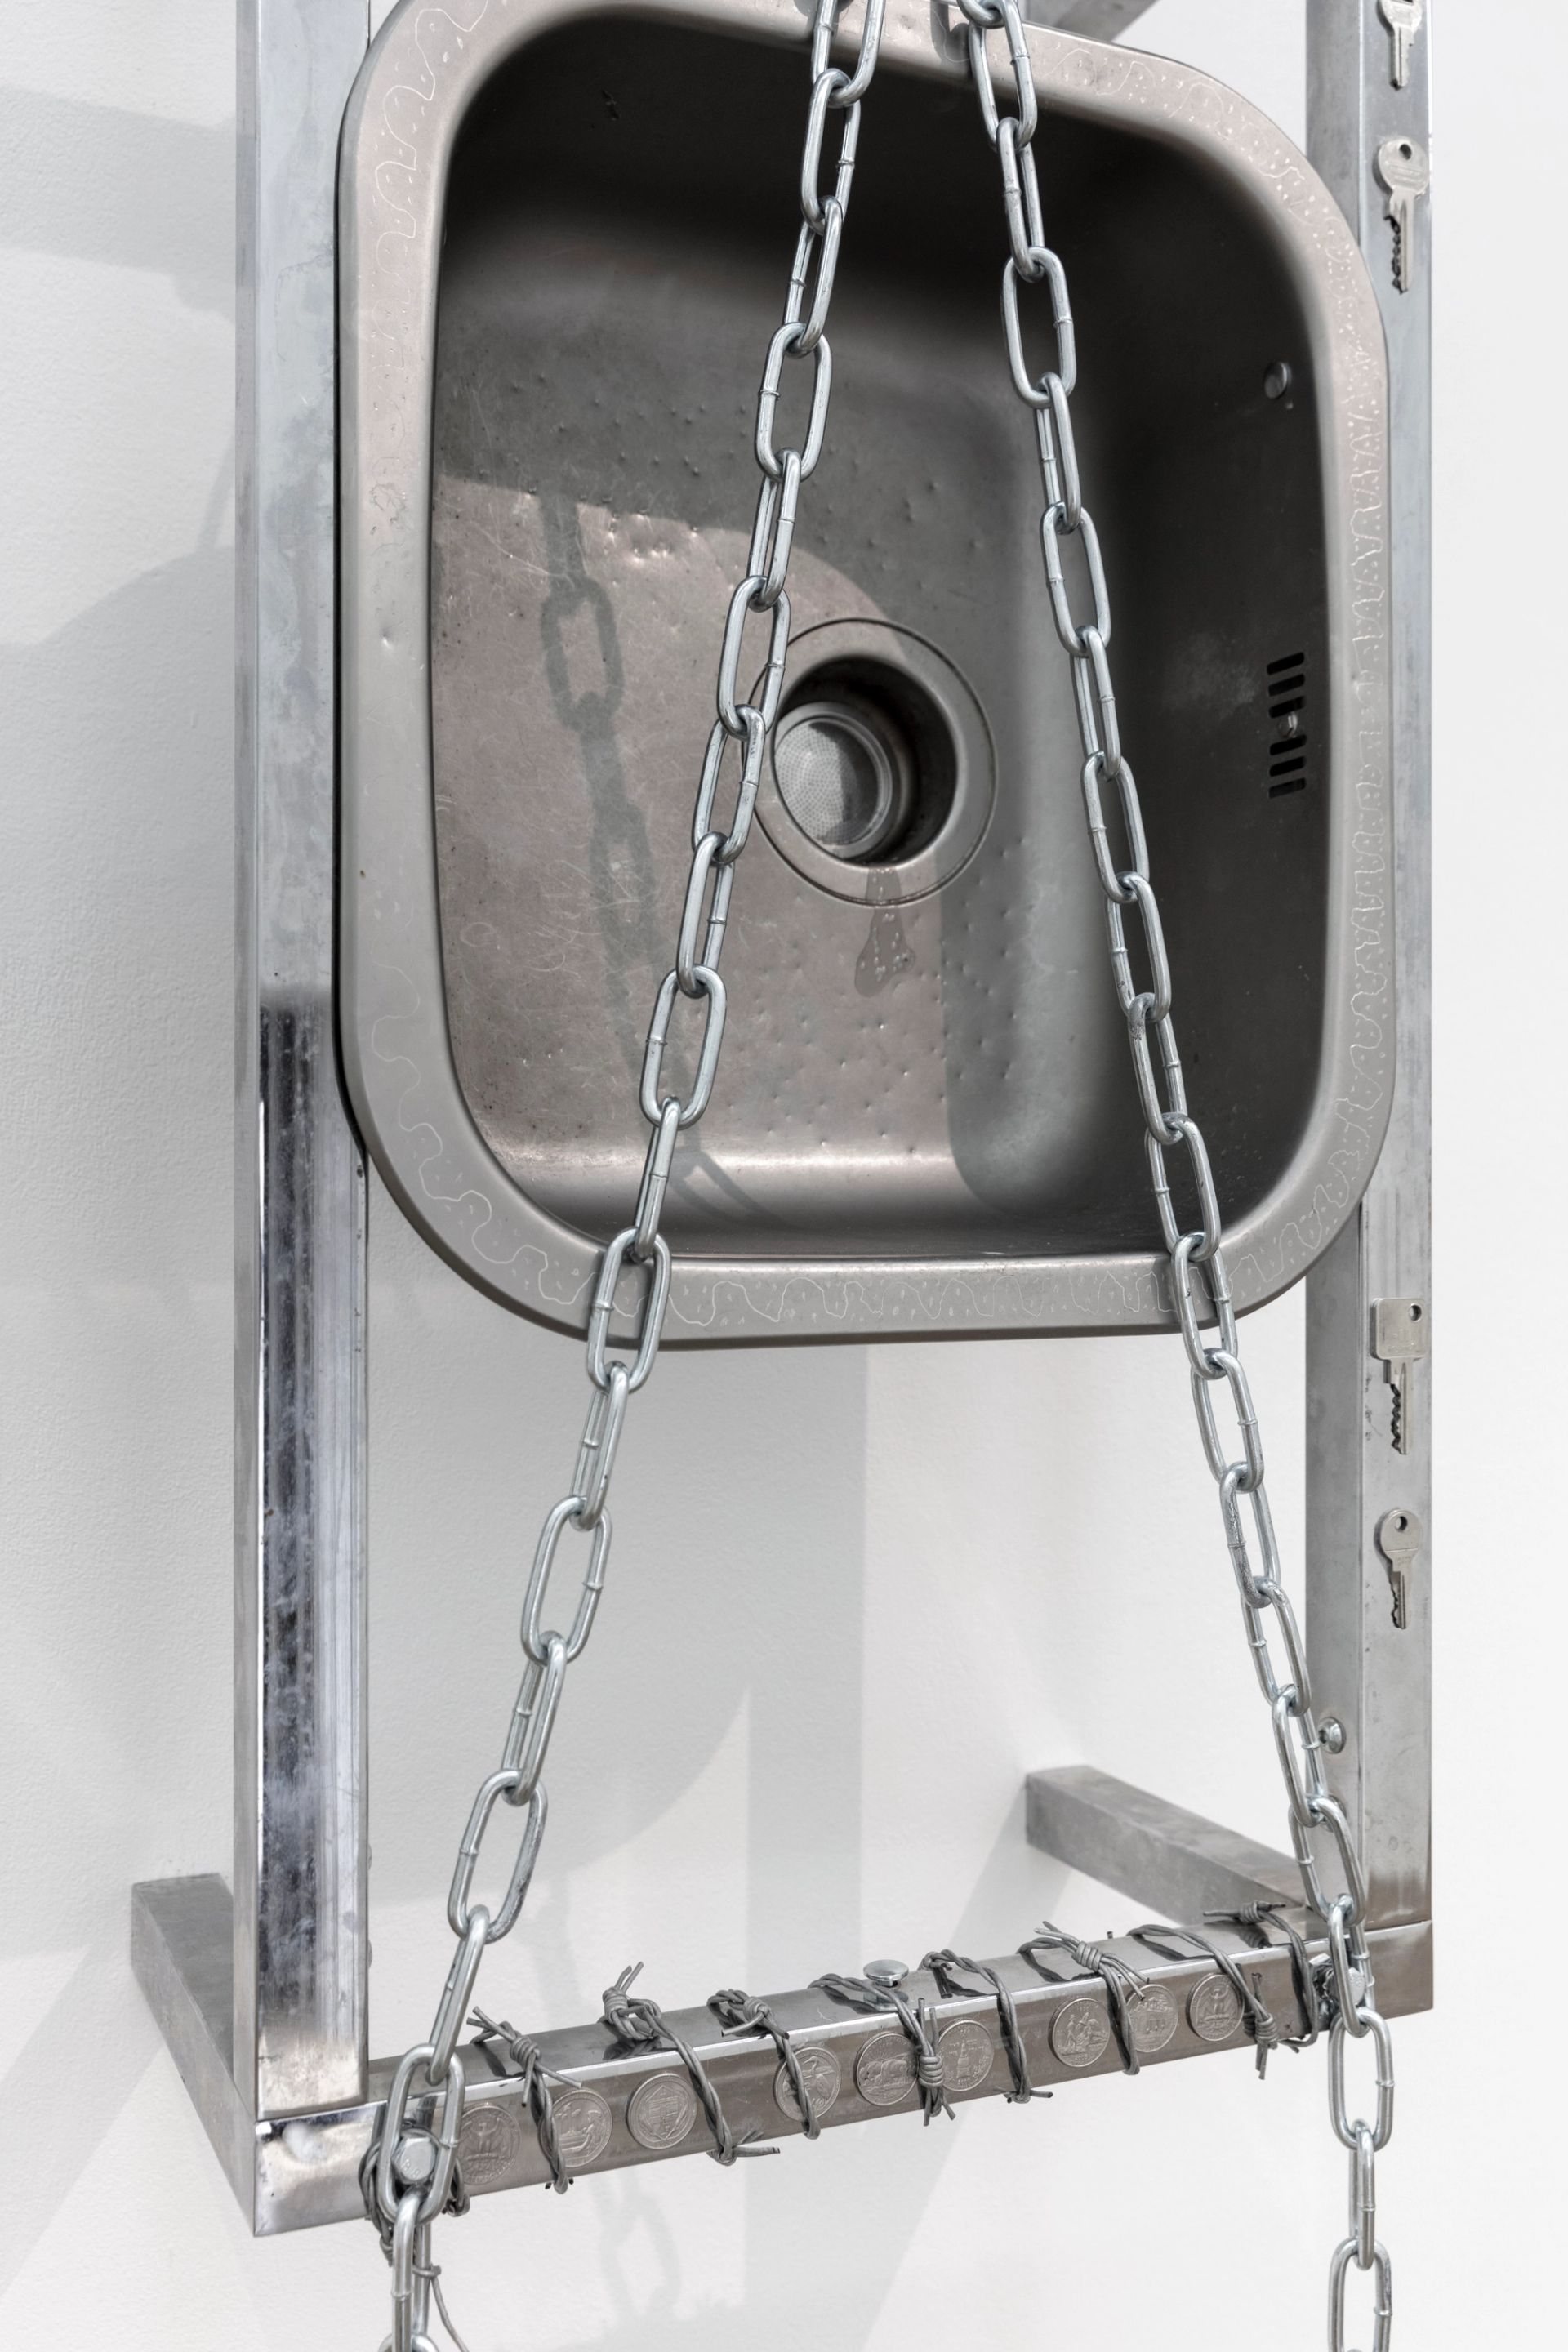 Anna McCarthy, “Shackles / Kitchen”, 2022, stainless steel, chrome, leather, coins, glue, bolts, wire, keys, 145 × 44.5 × 26.5cm